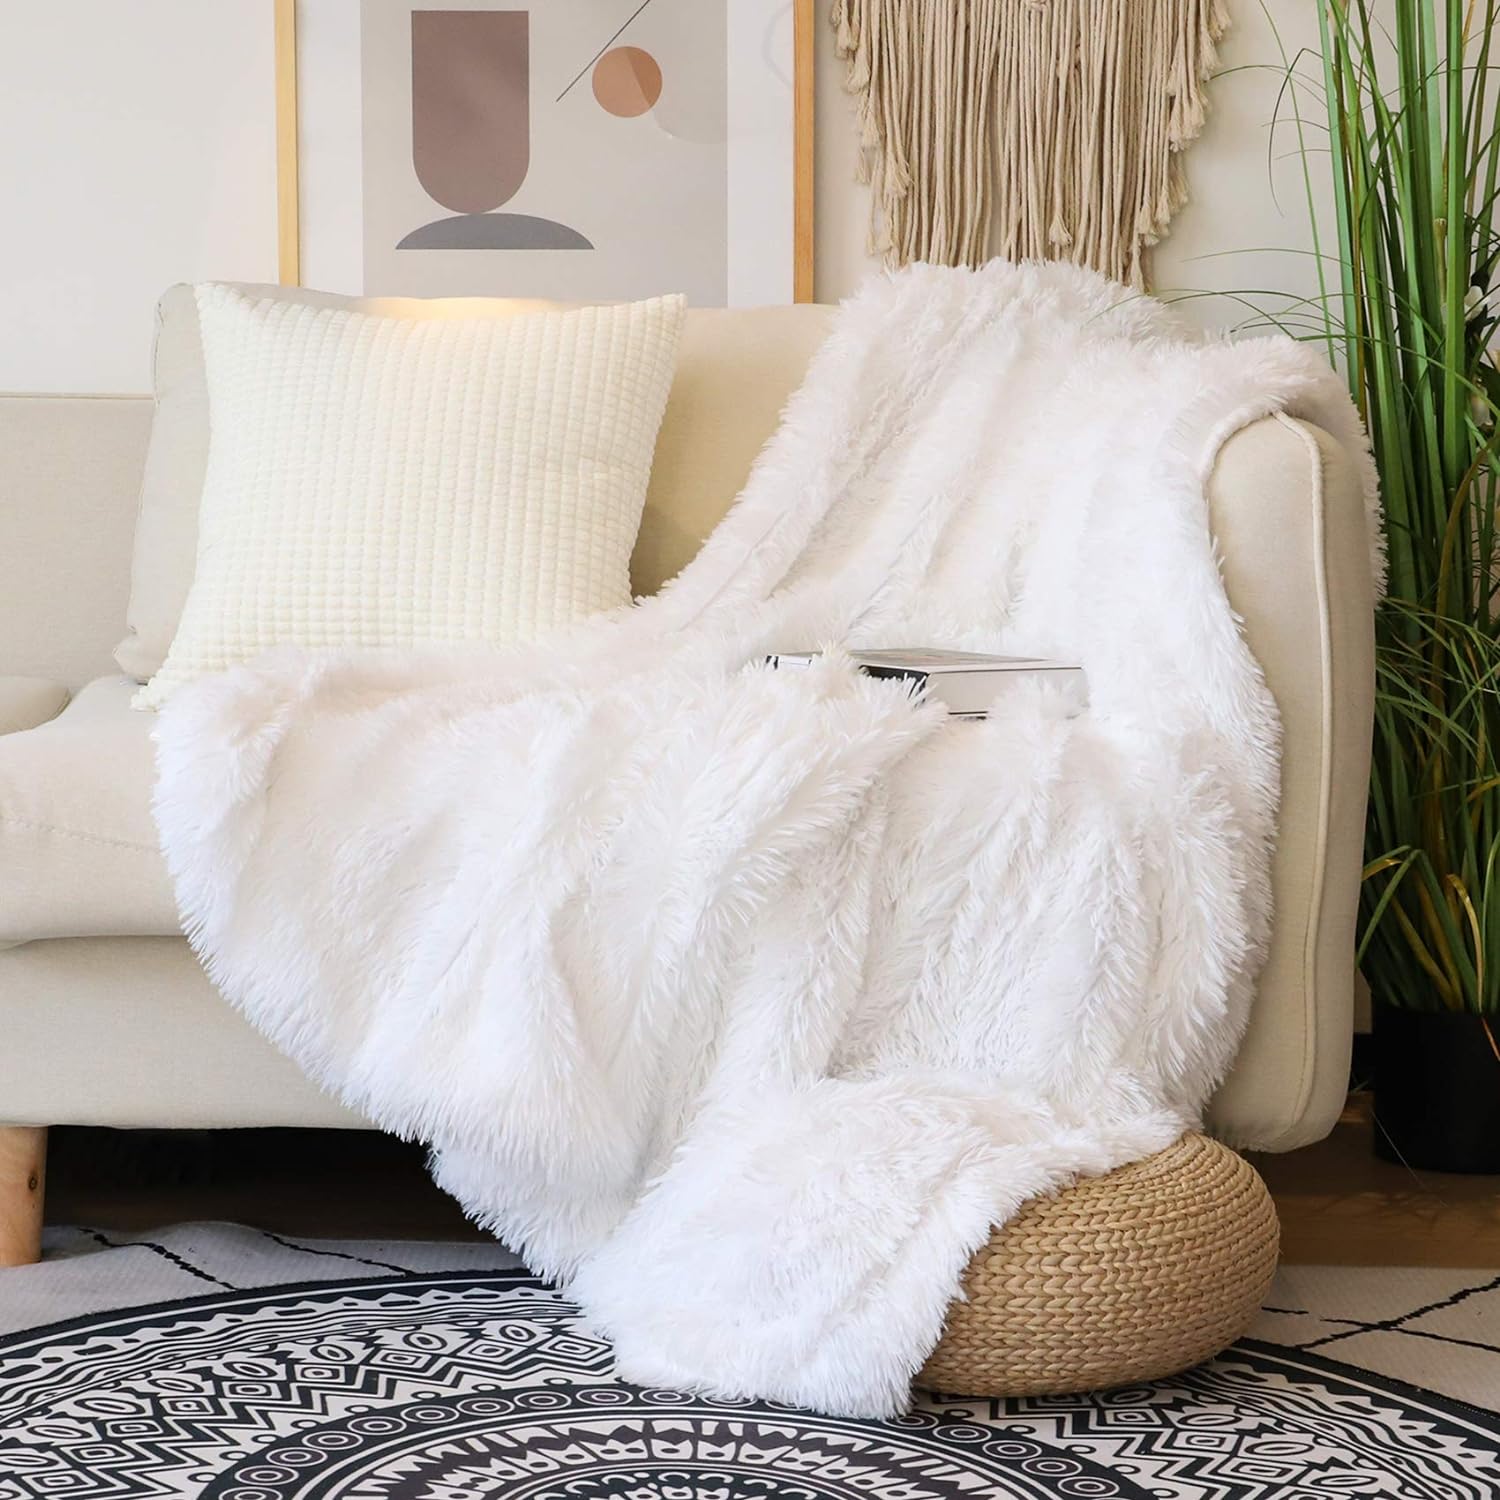 Tuddrom Decorative Extra Soft Faux Fur Throw Blanket 50 x 60,Solid Reversible Fuzzy Long Hair Shaggy Blanket,Fluffy Cozy Plush Fleece Comfy Microfiber Fur Blanket for Couch Sofa Bed,Pure White